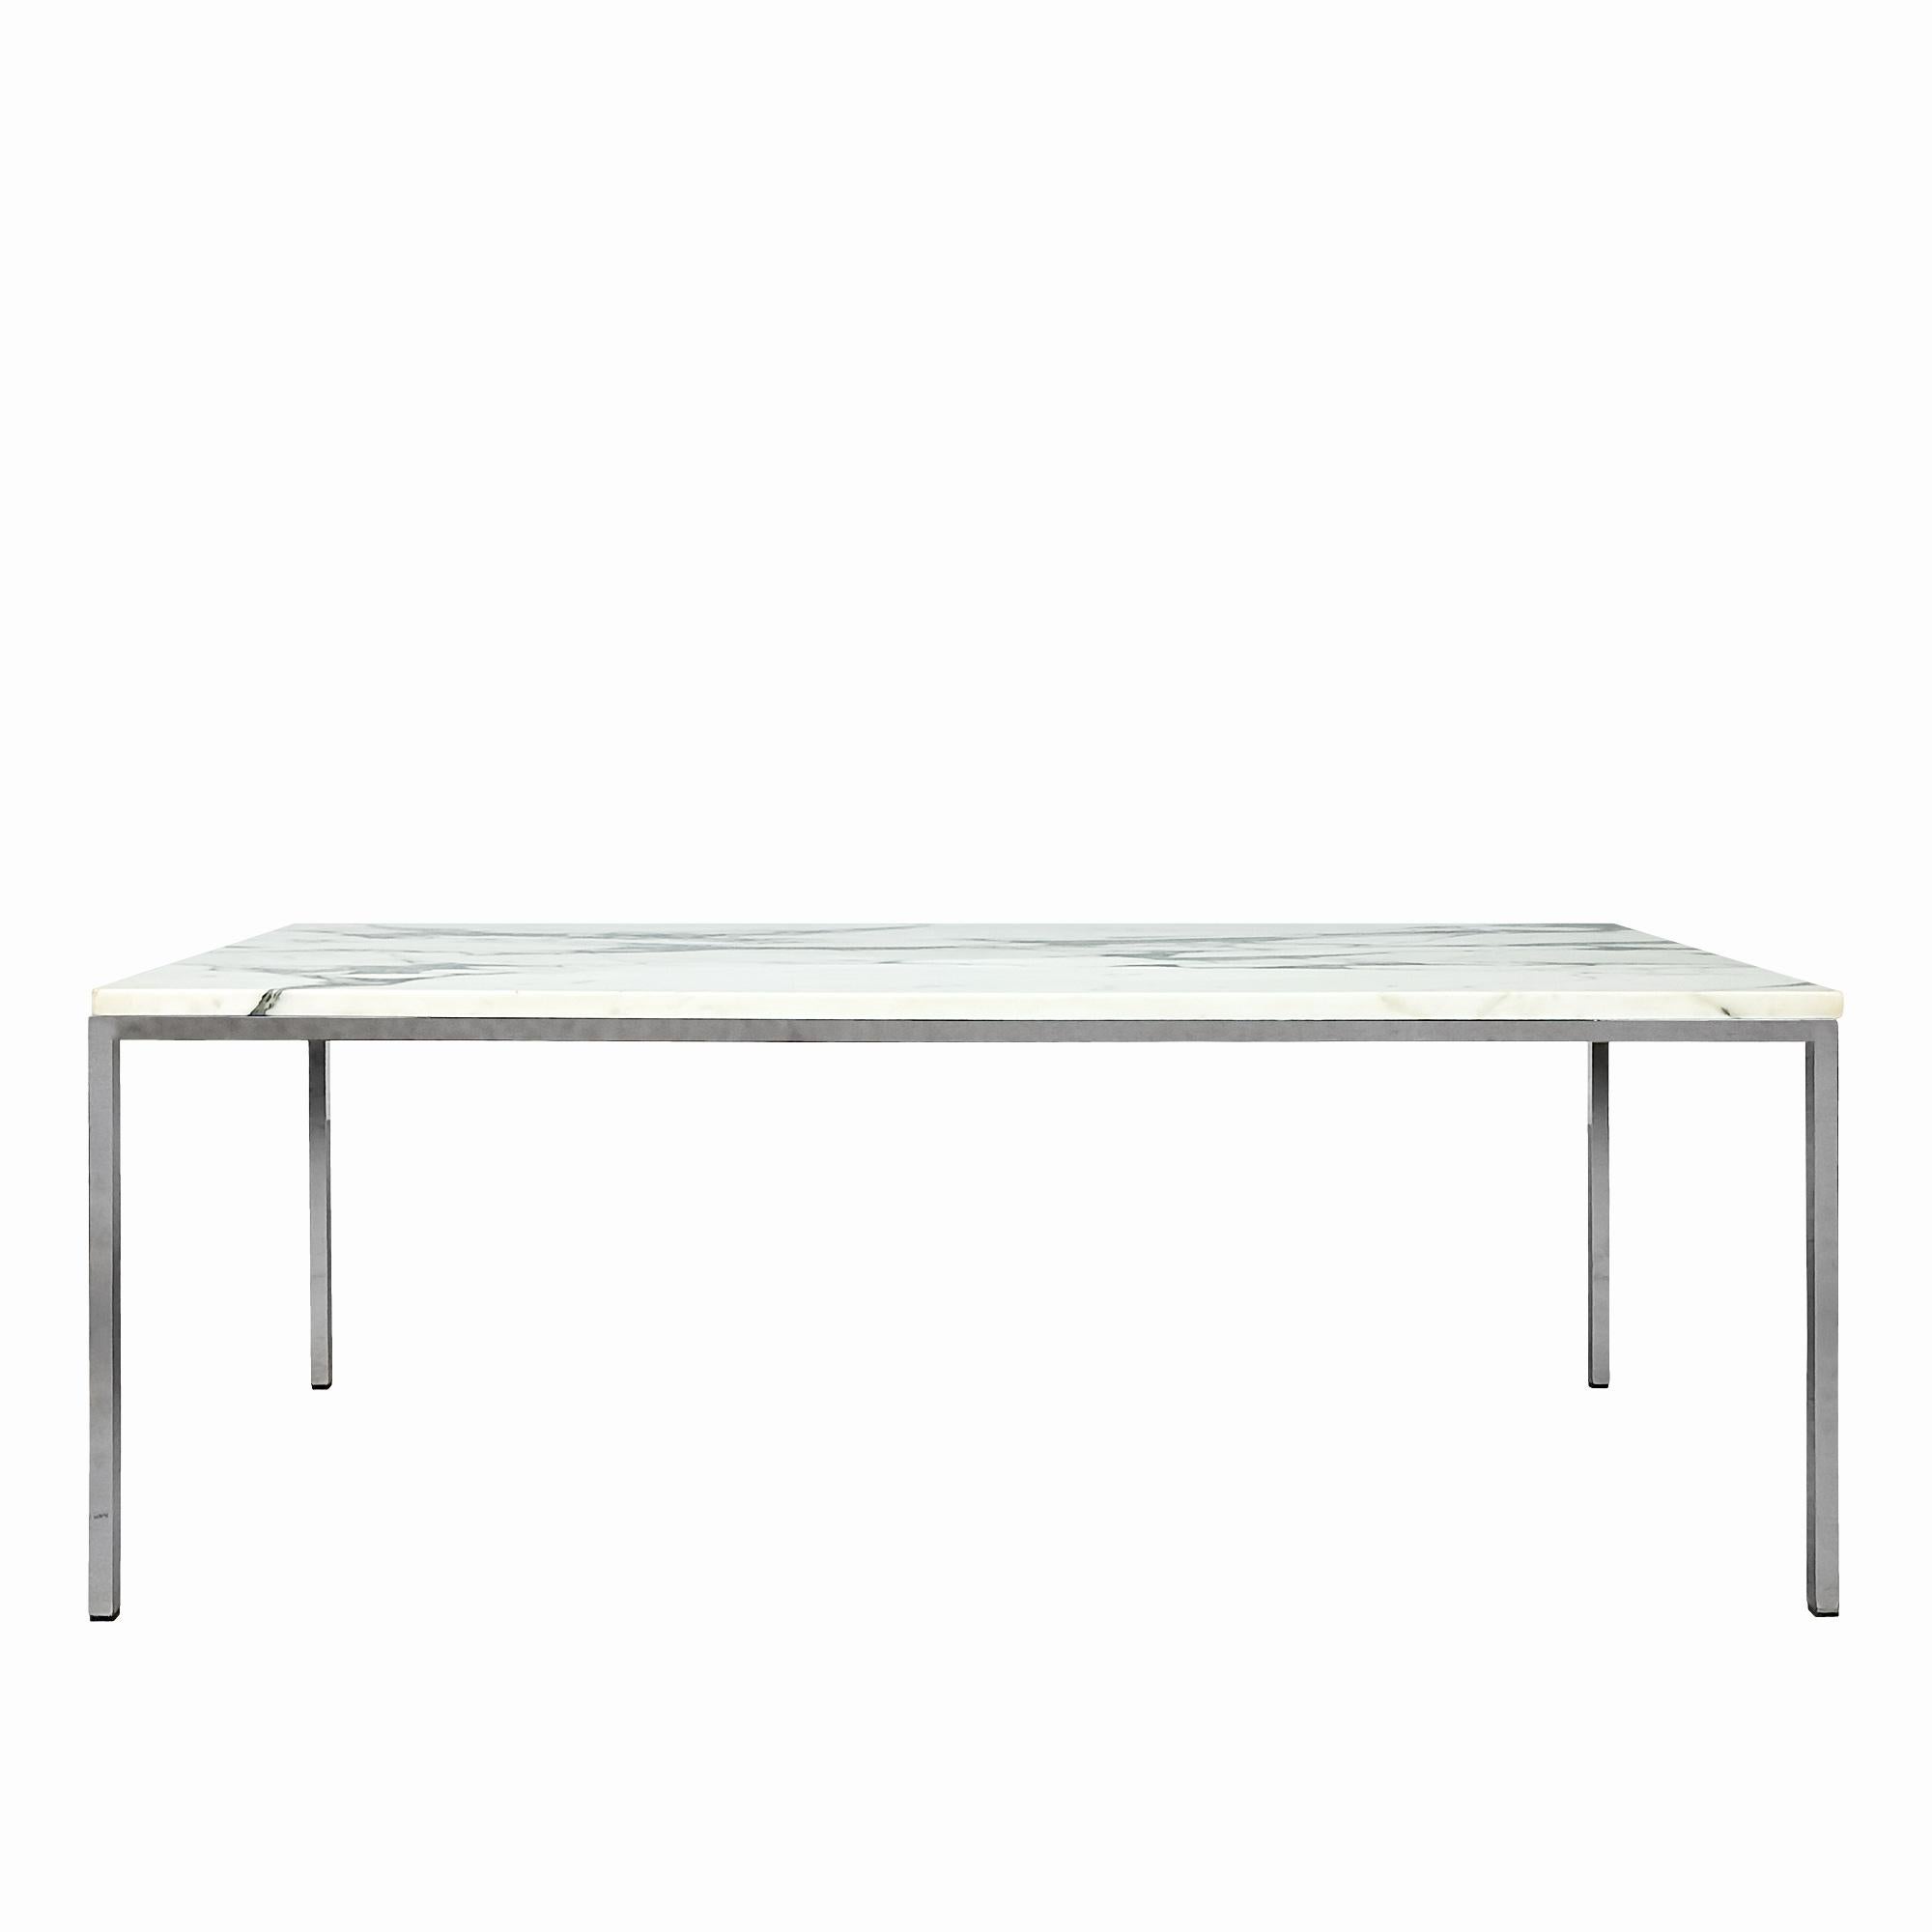 Coffee table with square base in nickel-plated steel topped with a beautiful black-gray white Carrara marble. 
Model by Florence Knoll.

United States c. 1970